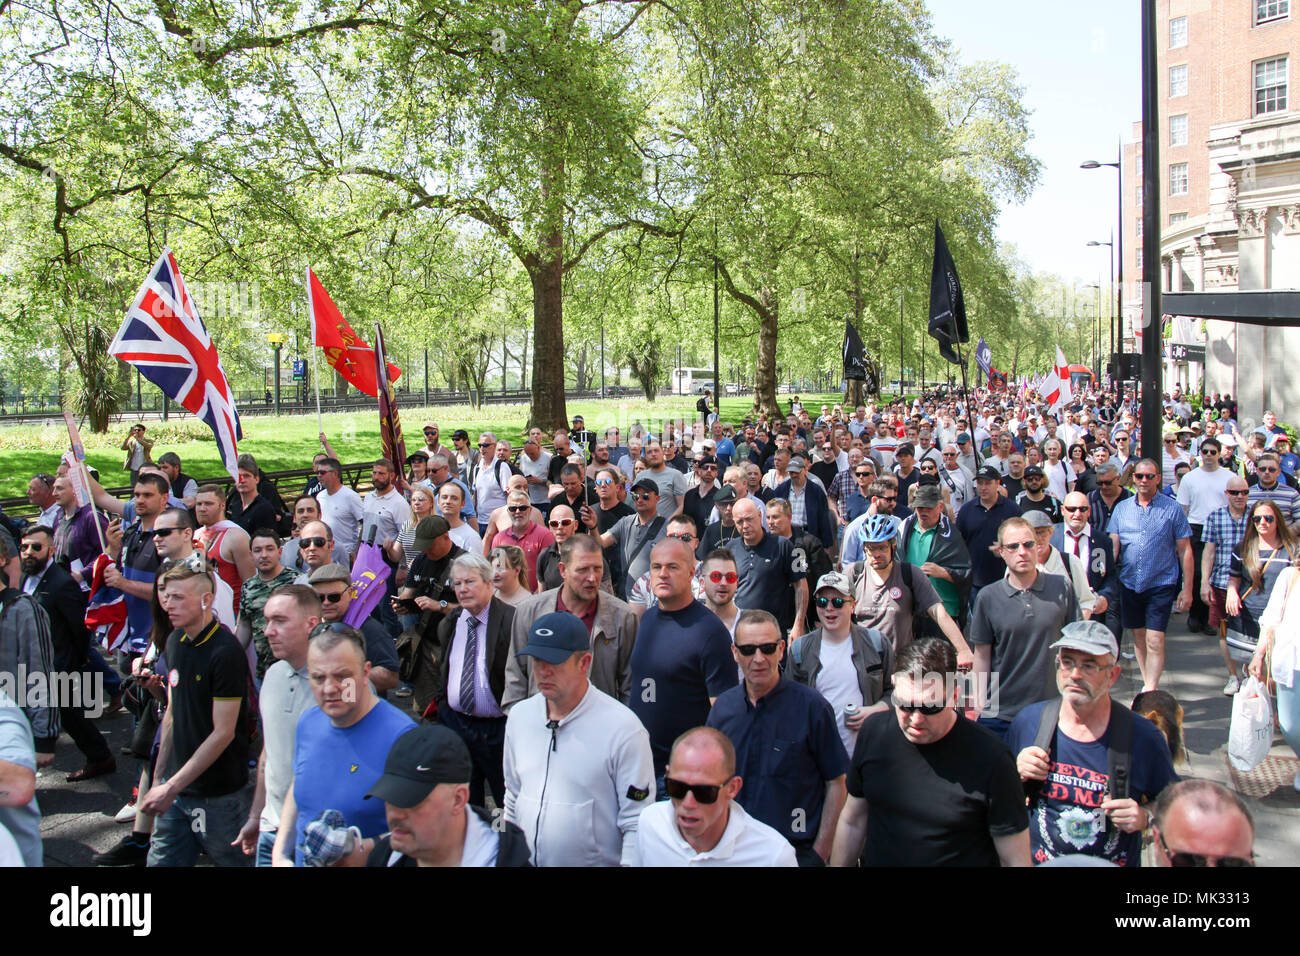 London, UK. 6th May 2018. The Day for Freedom Marches through London Credit: Alex Cavendish/Alamy Live News Stock Photo